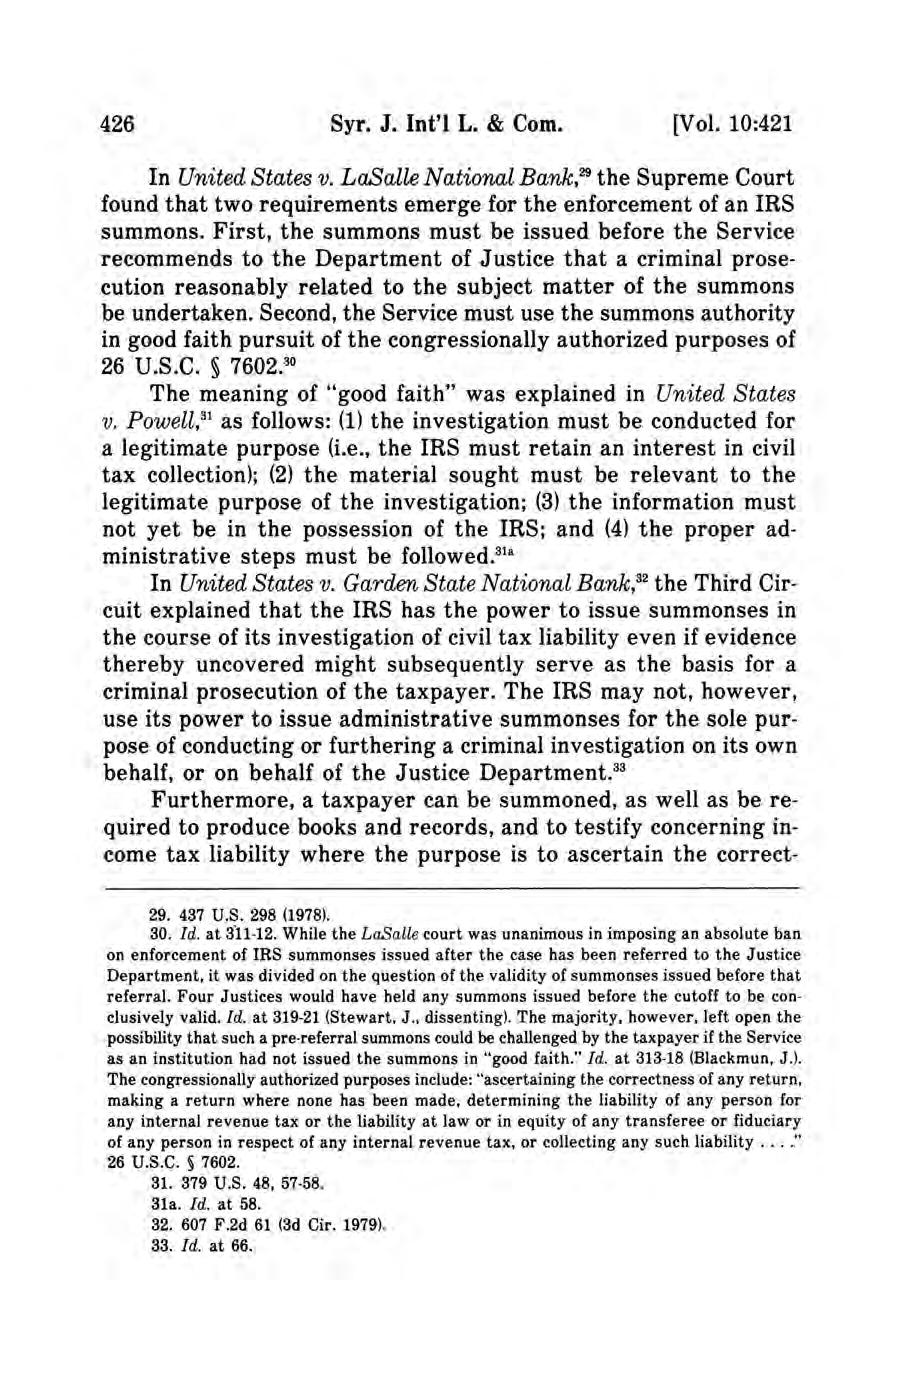 Syracuse Journal of International Law and Commerce, Vol. 10, No. 2 [1983], Art. 9 426 Syr. J. Int'l L. & Com. [Vol. 10:421 In United States v.